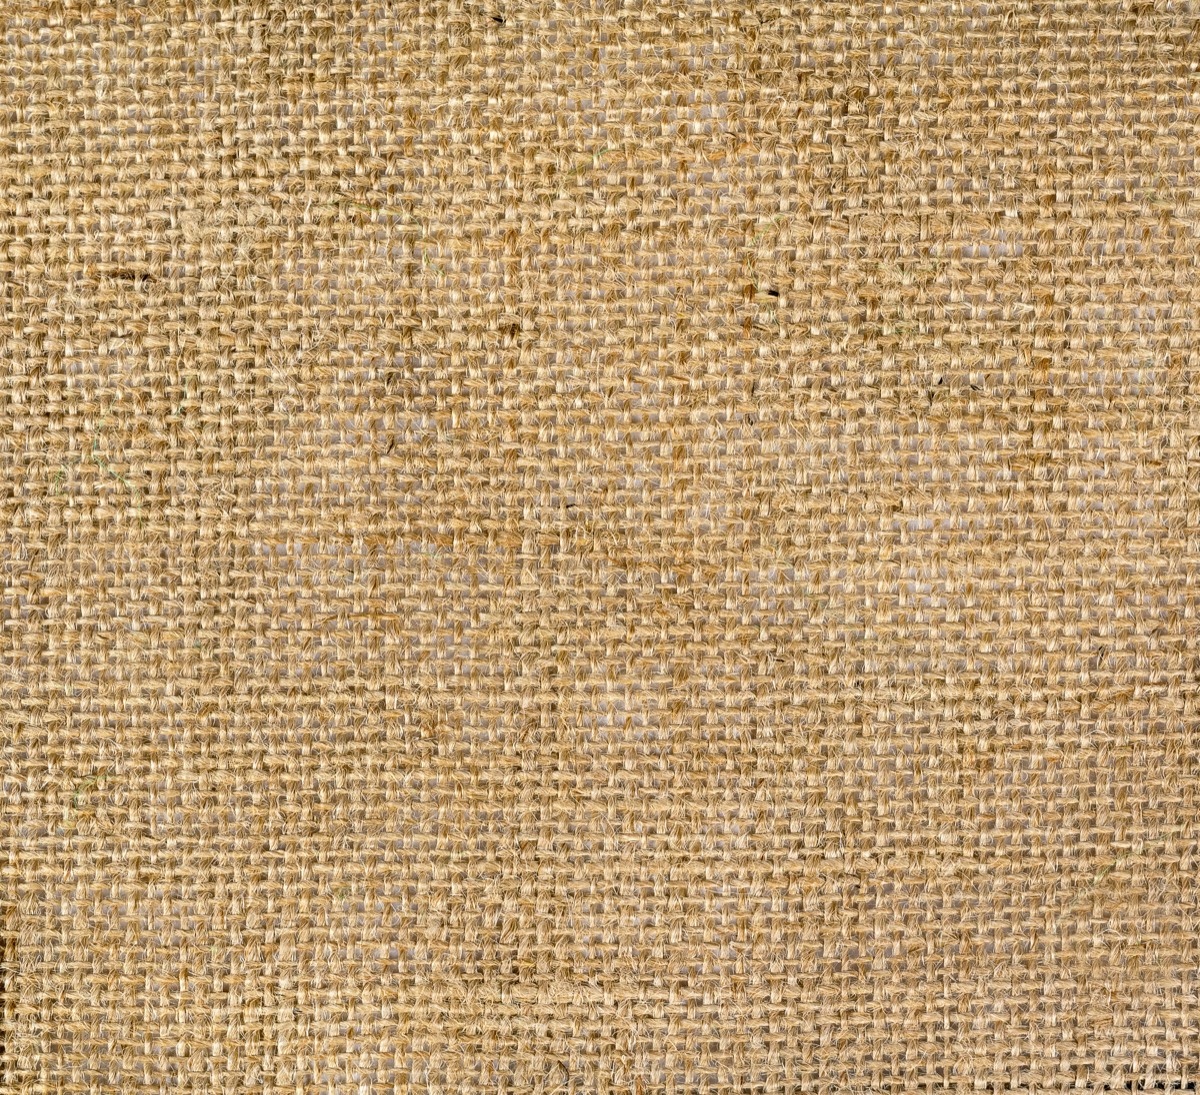 Colored Burlap Fabric | Burlap For Crafts | Eaton Brothers